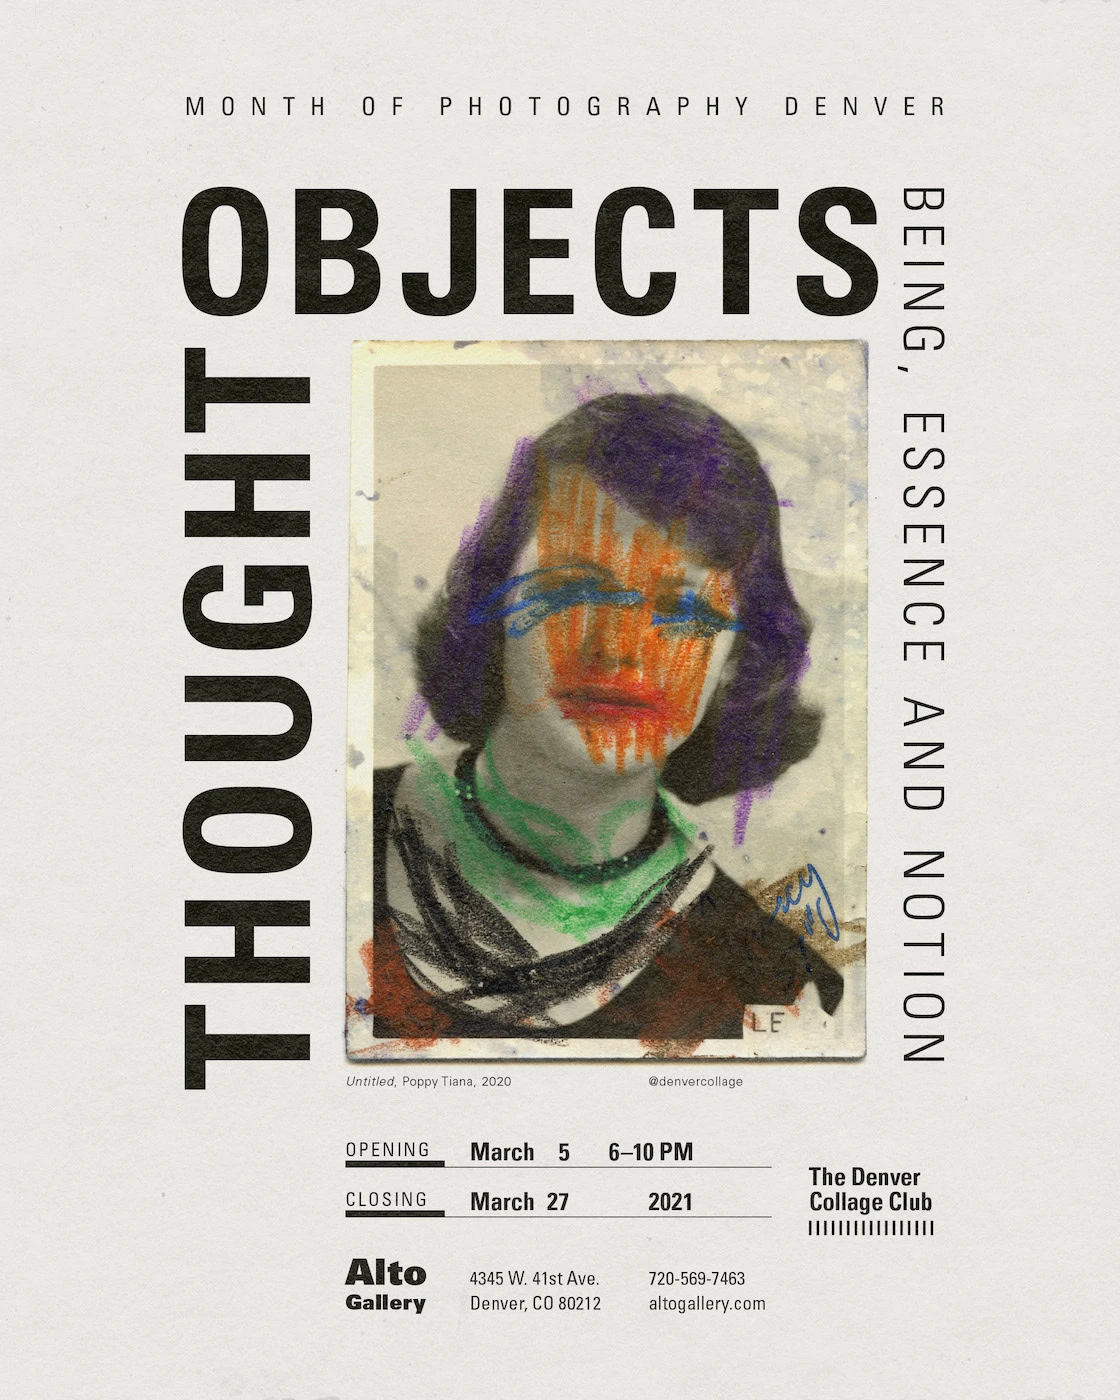 Poster for Thought Objects art show with uppercase text wrapping around a portrait-oriented piece of artwork